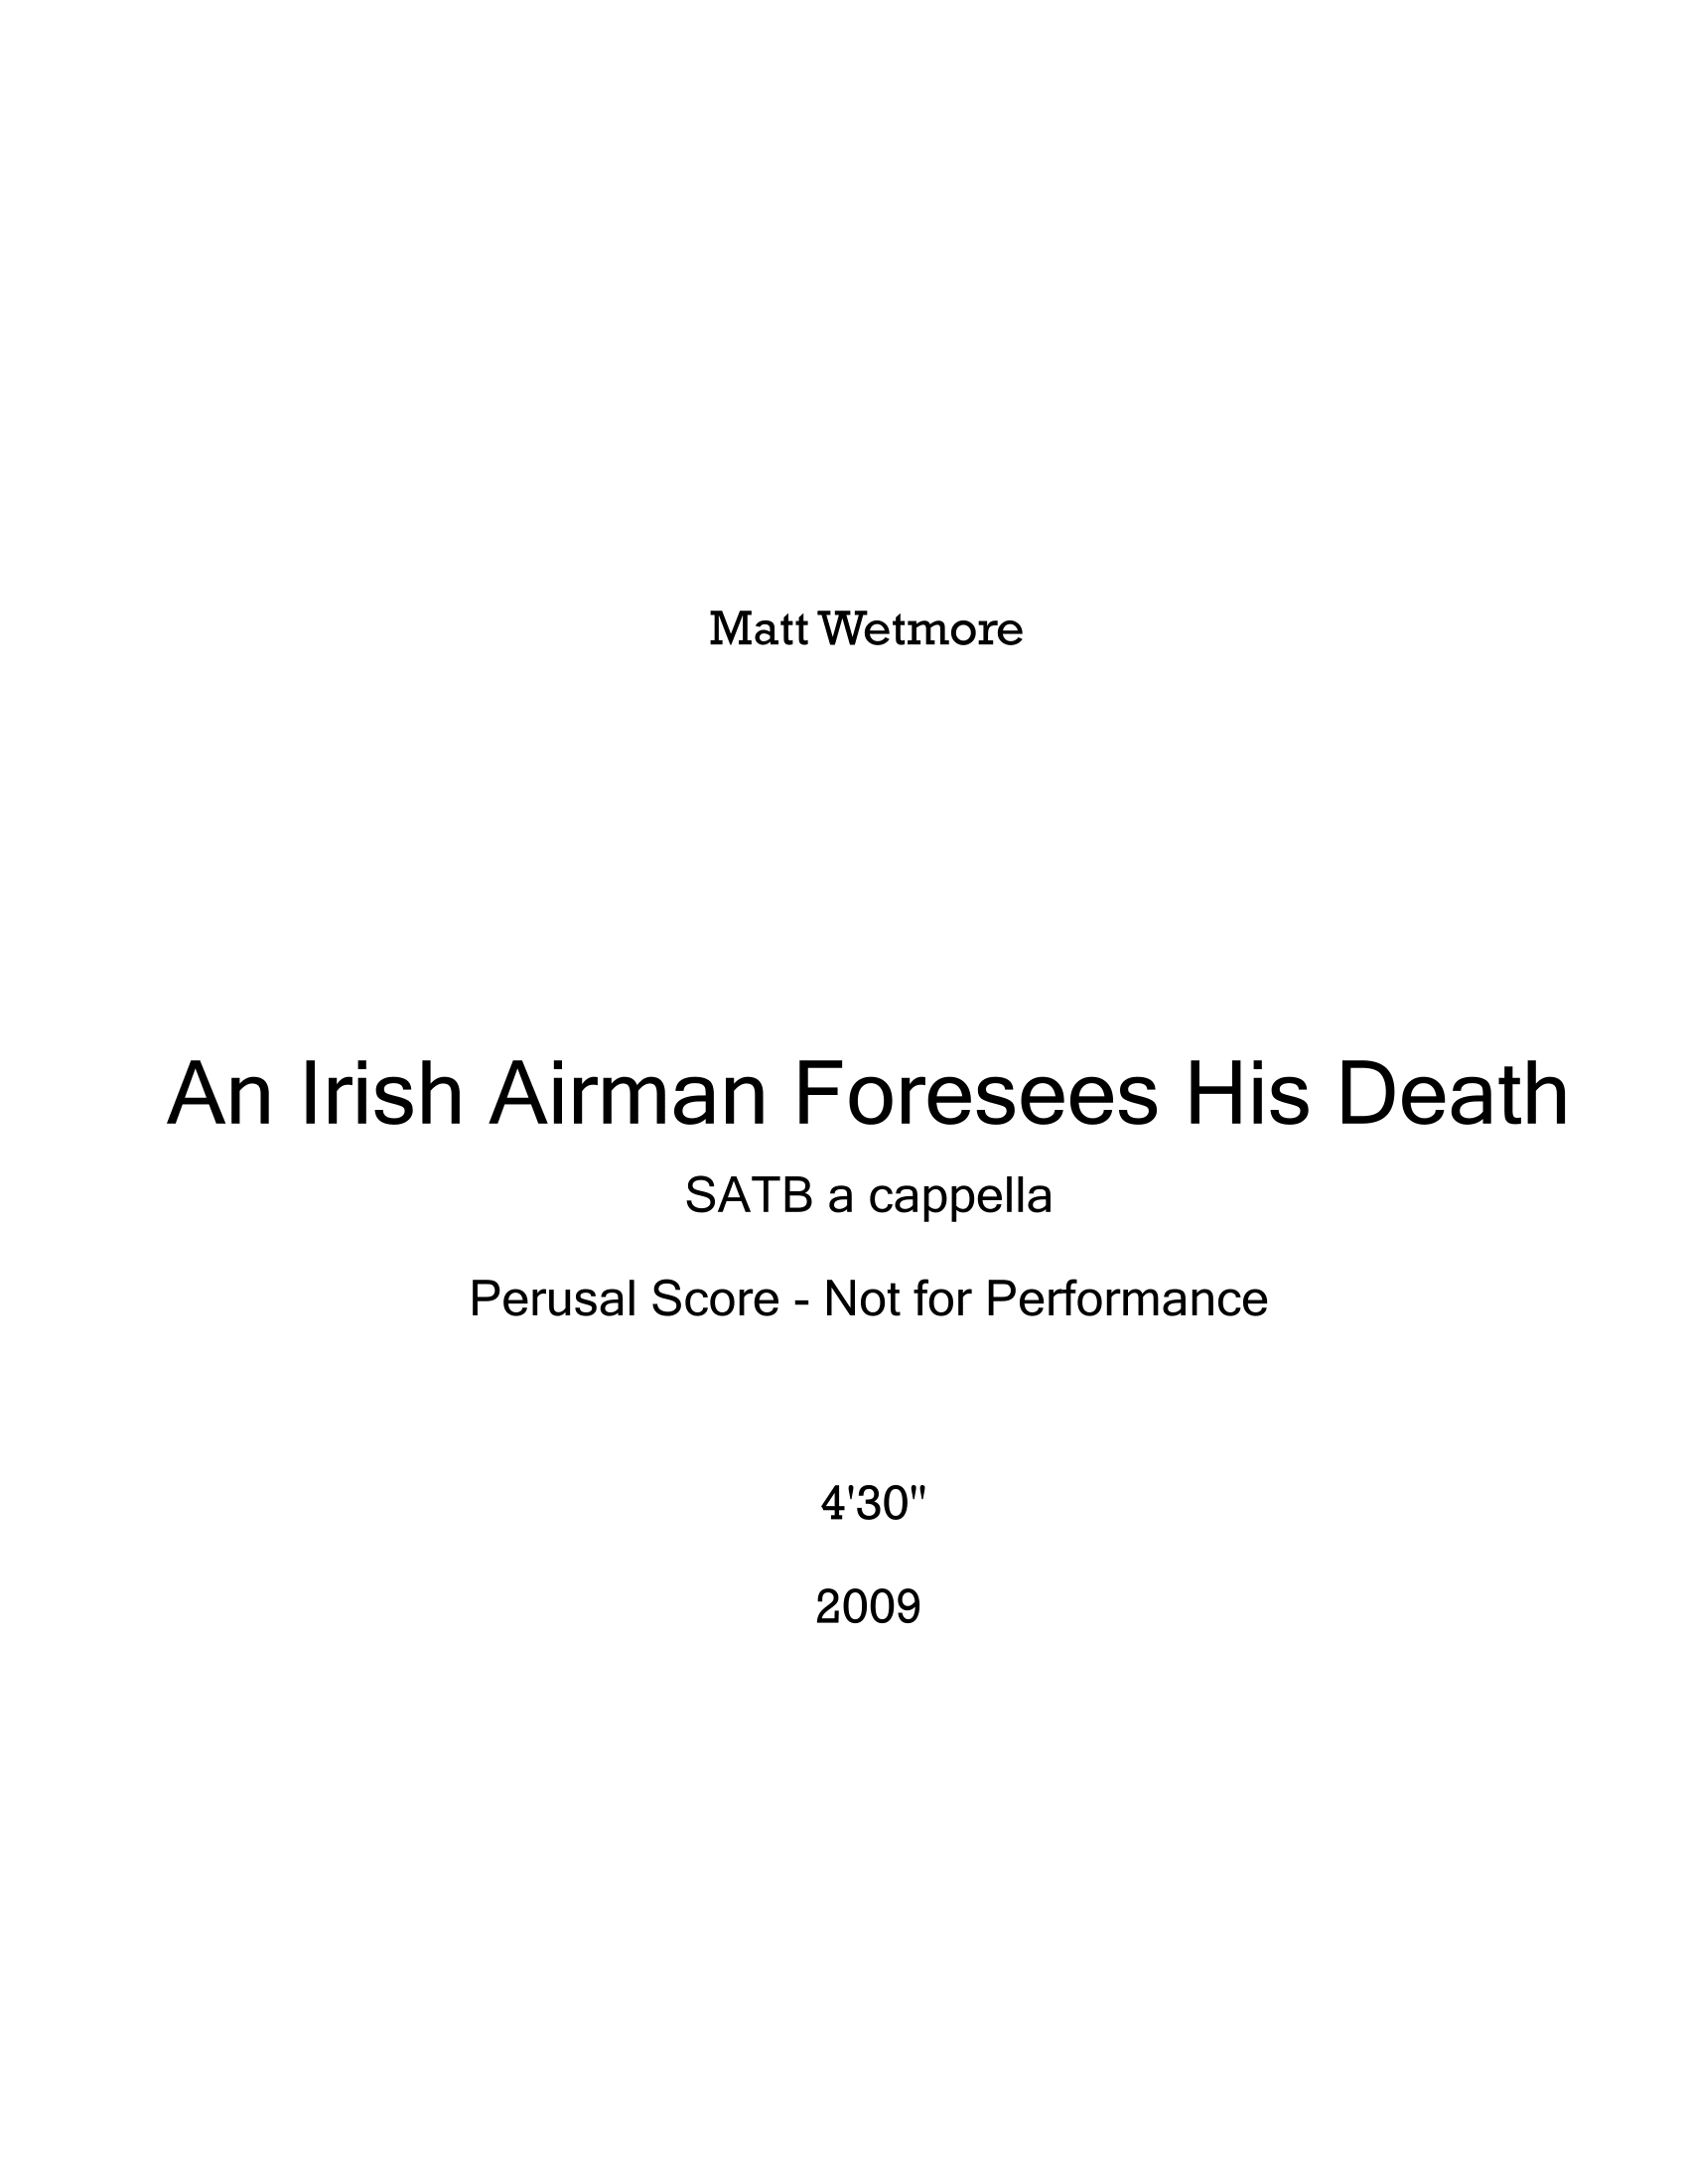 An Irish Airman Foresees His Death Perusal-1.png